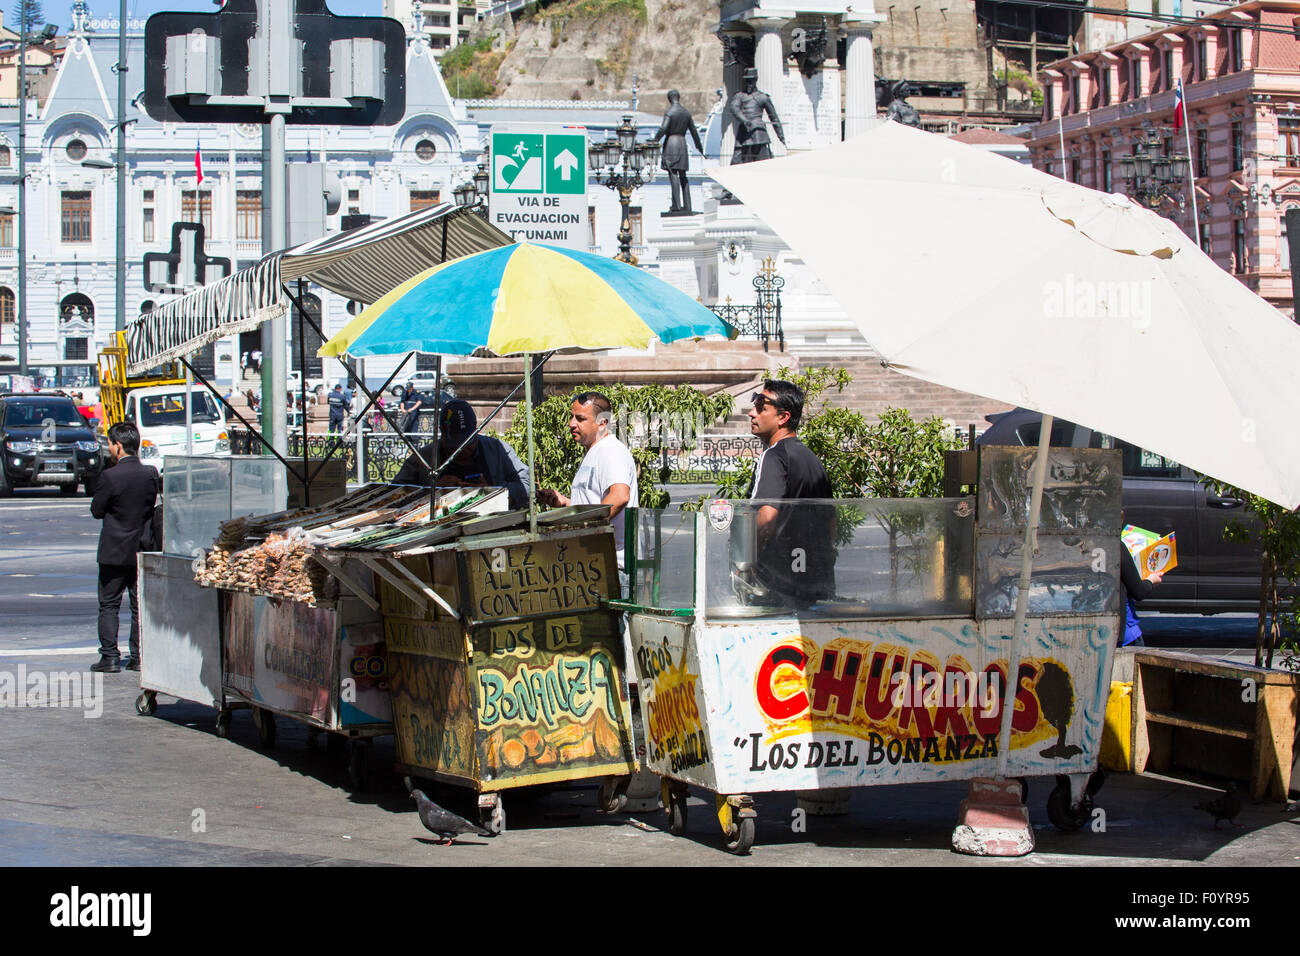 Food stands in Plaza Sotomayor, Valparaiso, Chile Stock Photo